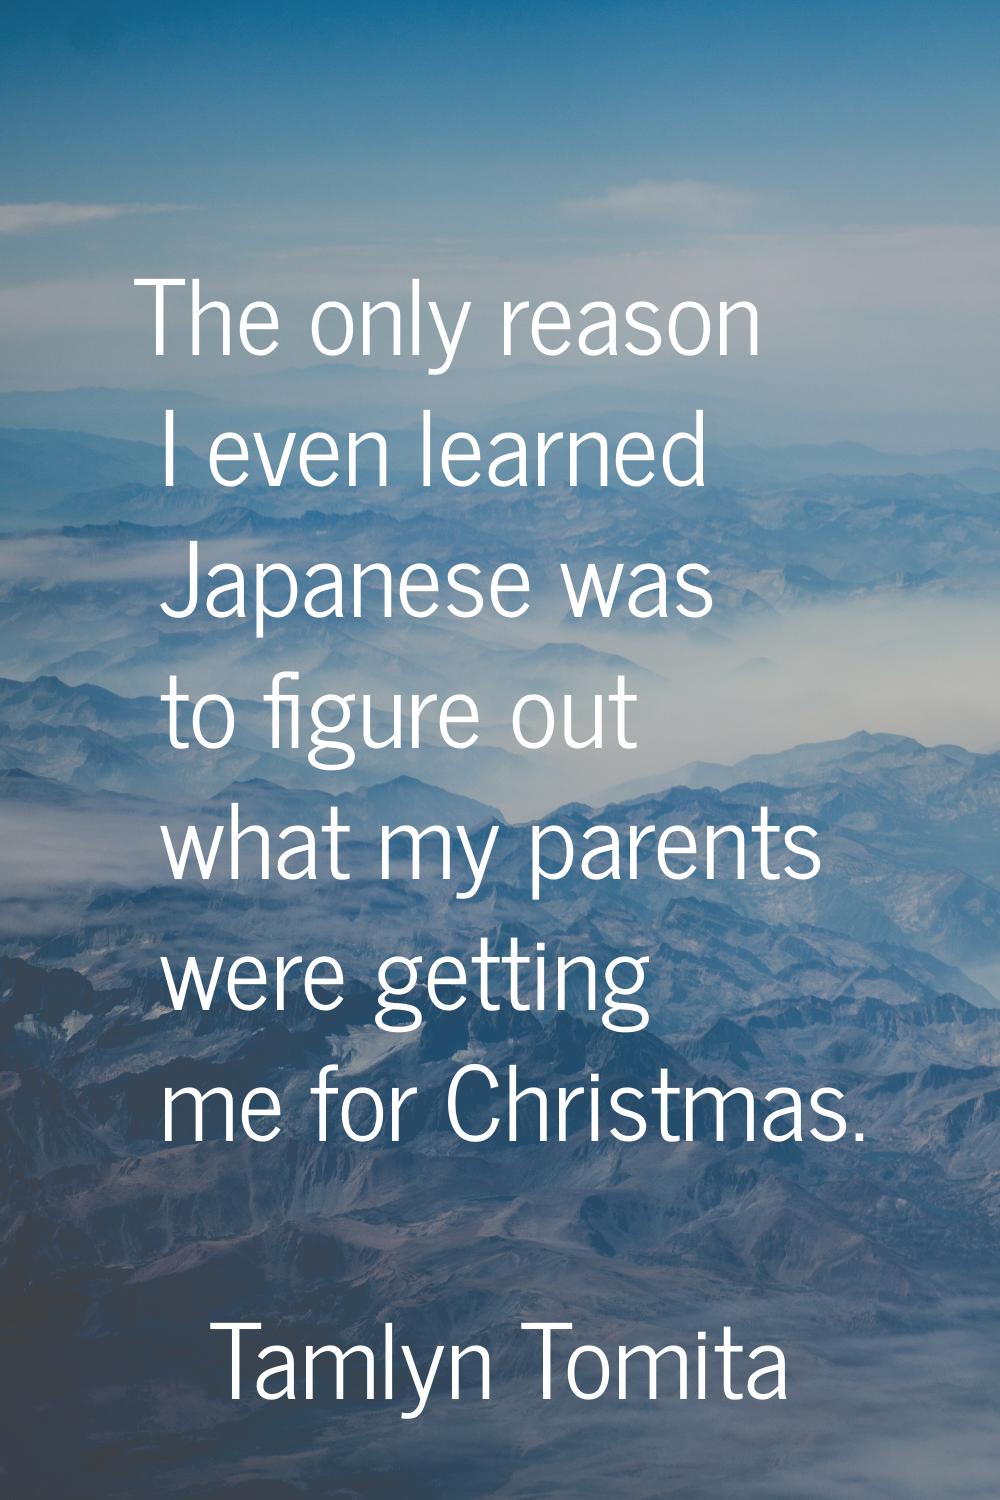 The only reason I even learned Japanese was to figure out what my parents were getting me for Chris